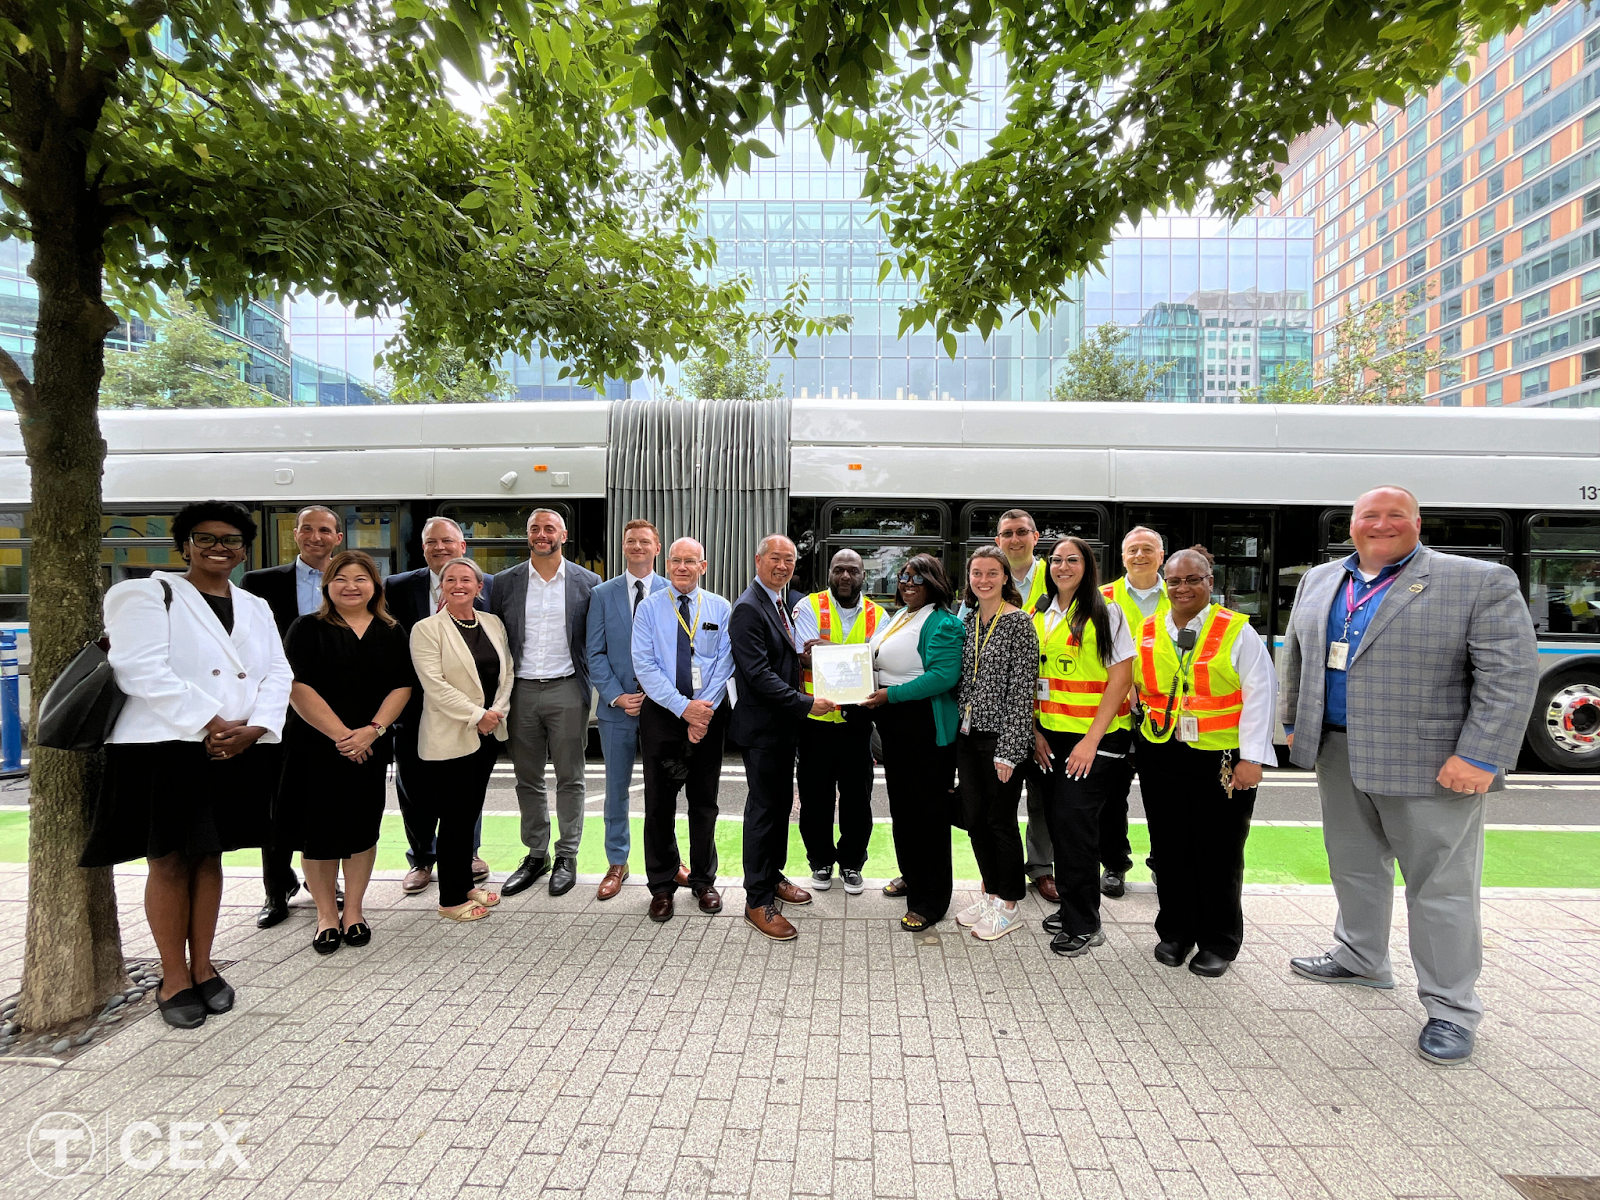 Seaport business leaders and MBTA employees gather in front of a Silver Line bus.